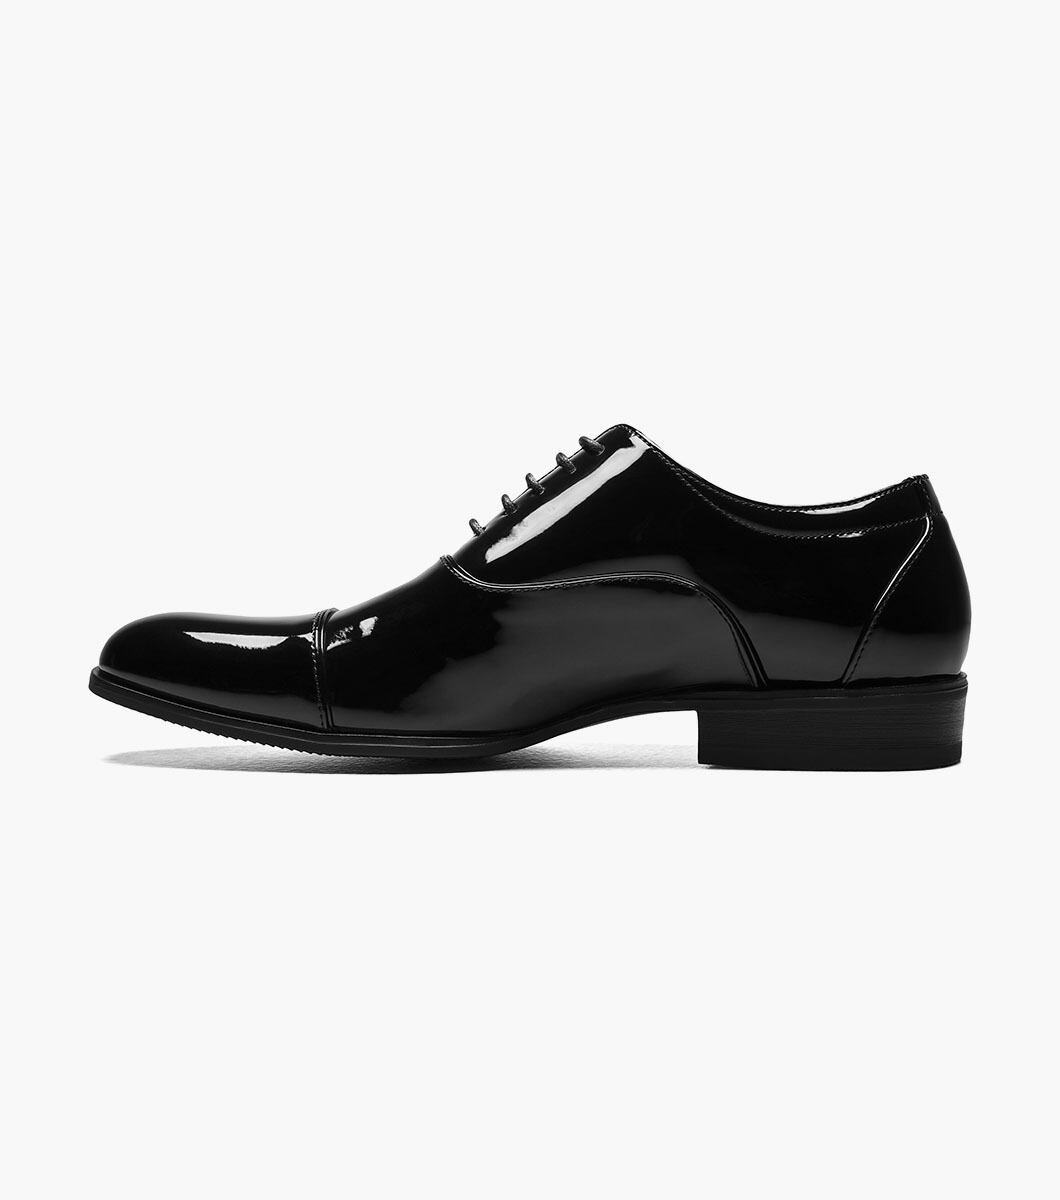 Stacy Adams Mens Tuxedo shoes Gala Black Patent Leather lace up 24998-004 